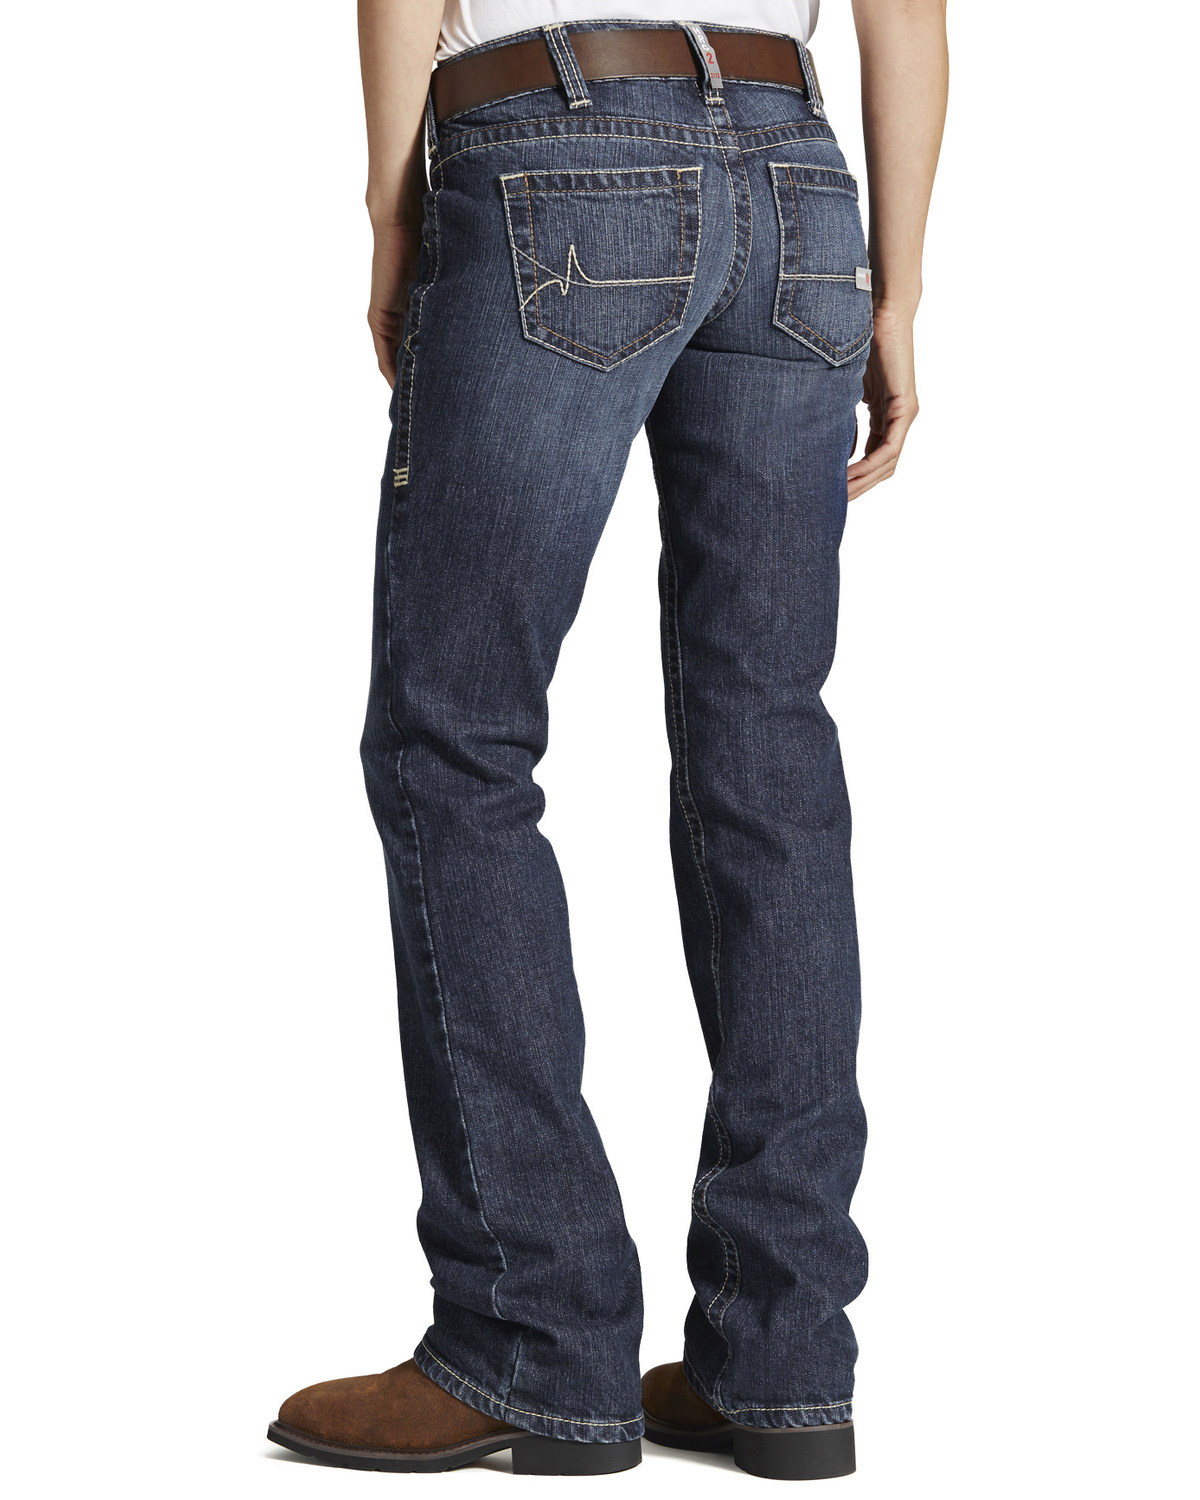 Ariat Trouser Jeans Size Chart